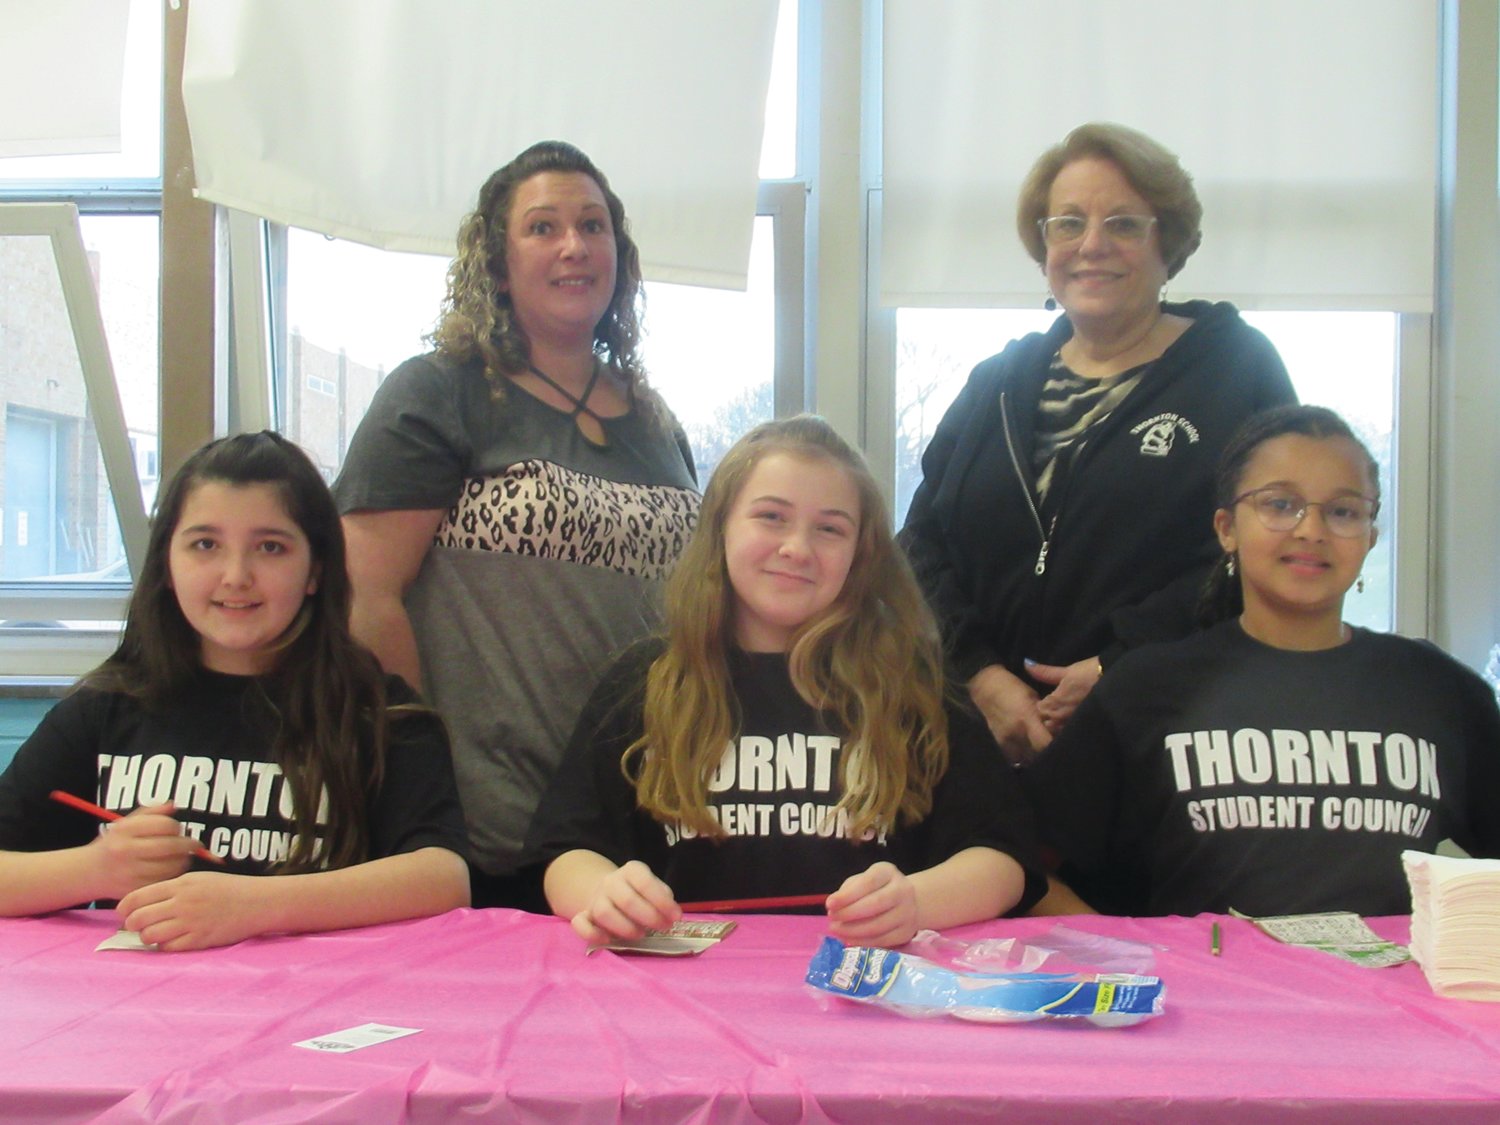 BINGO LEADERS: Thornton Elementary School Student Council members Julianna Stonis, Brooke Charpentier and Sokhna Fall are joined by parent volunteer Dana Stonis and Principal Louise Denham at last Friday’s Bingo Night.